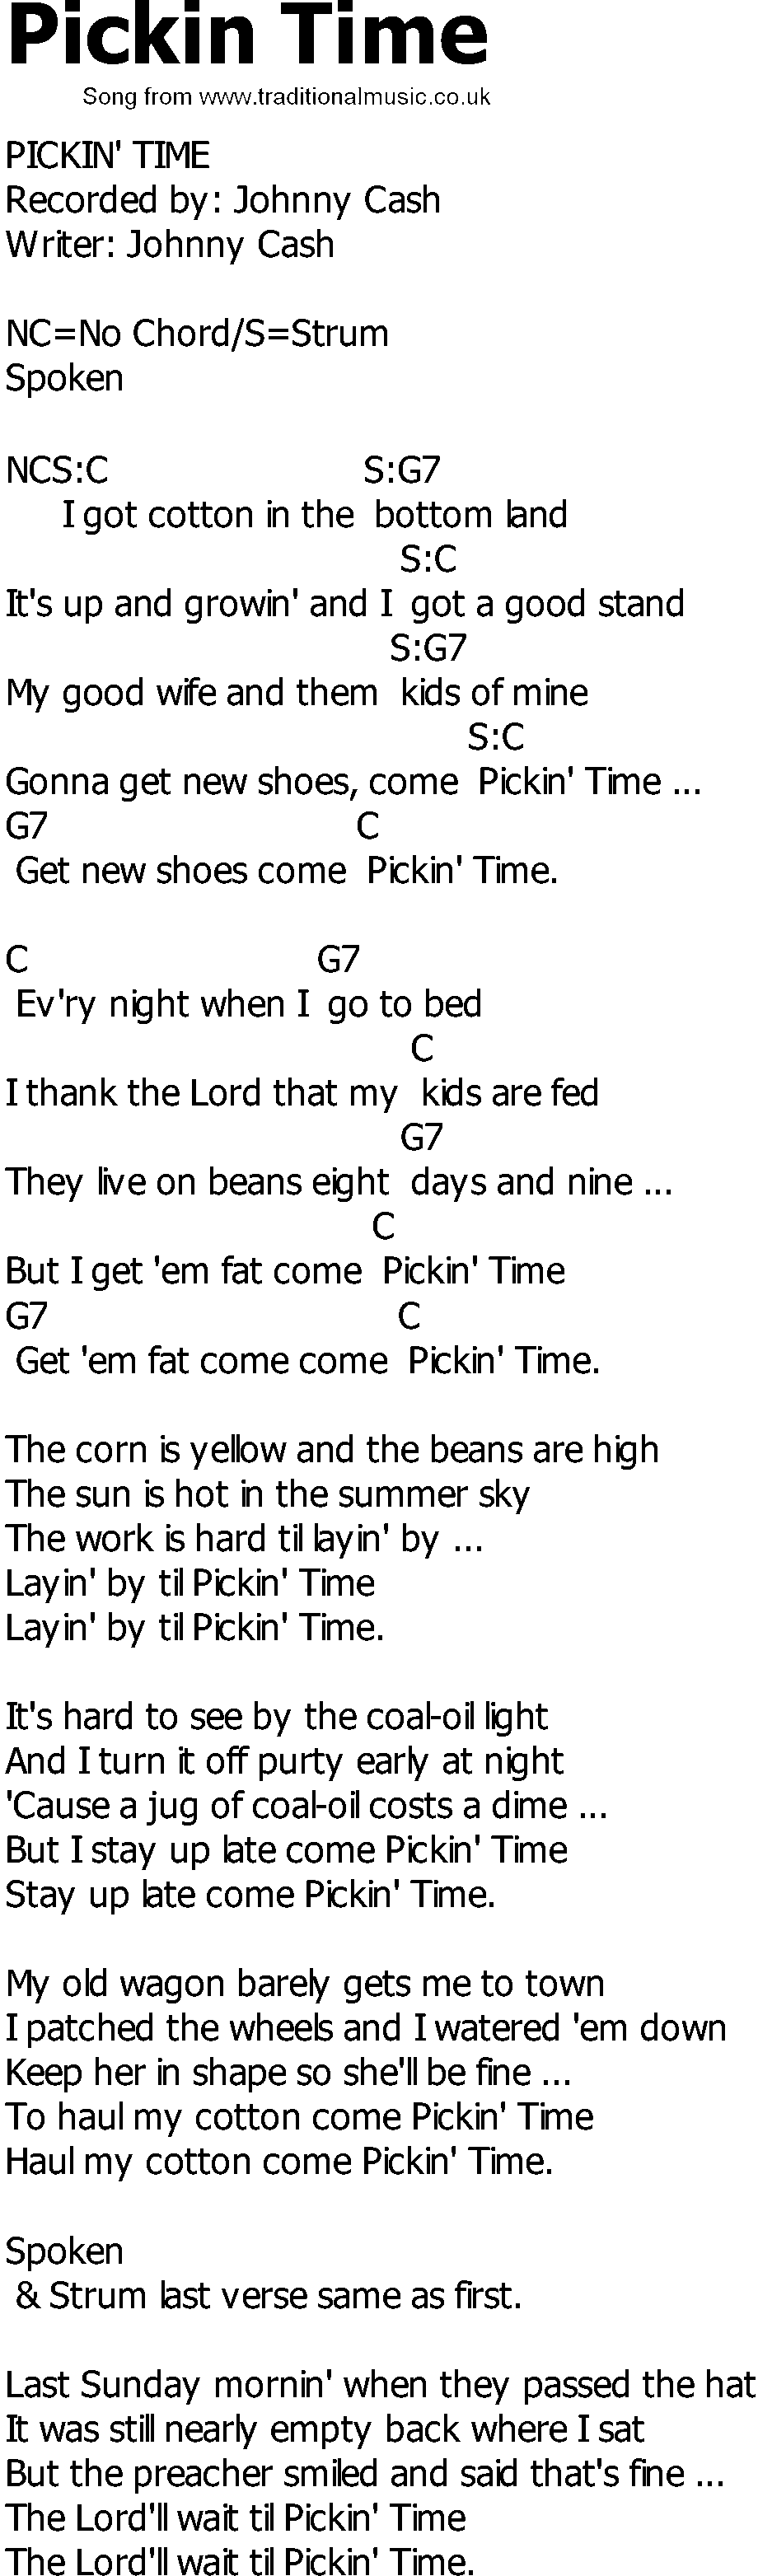 Old Country song lyrics with chords - Pickin Time